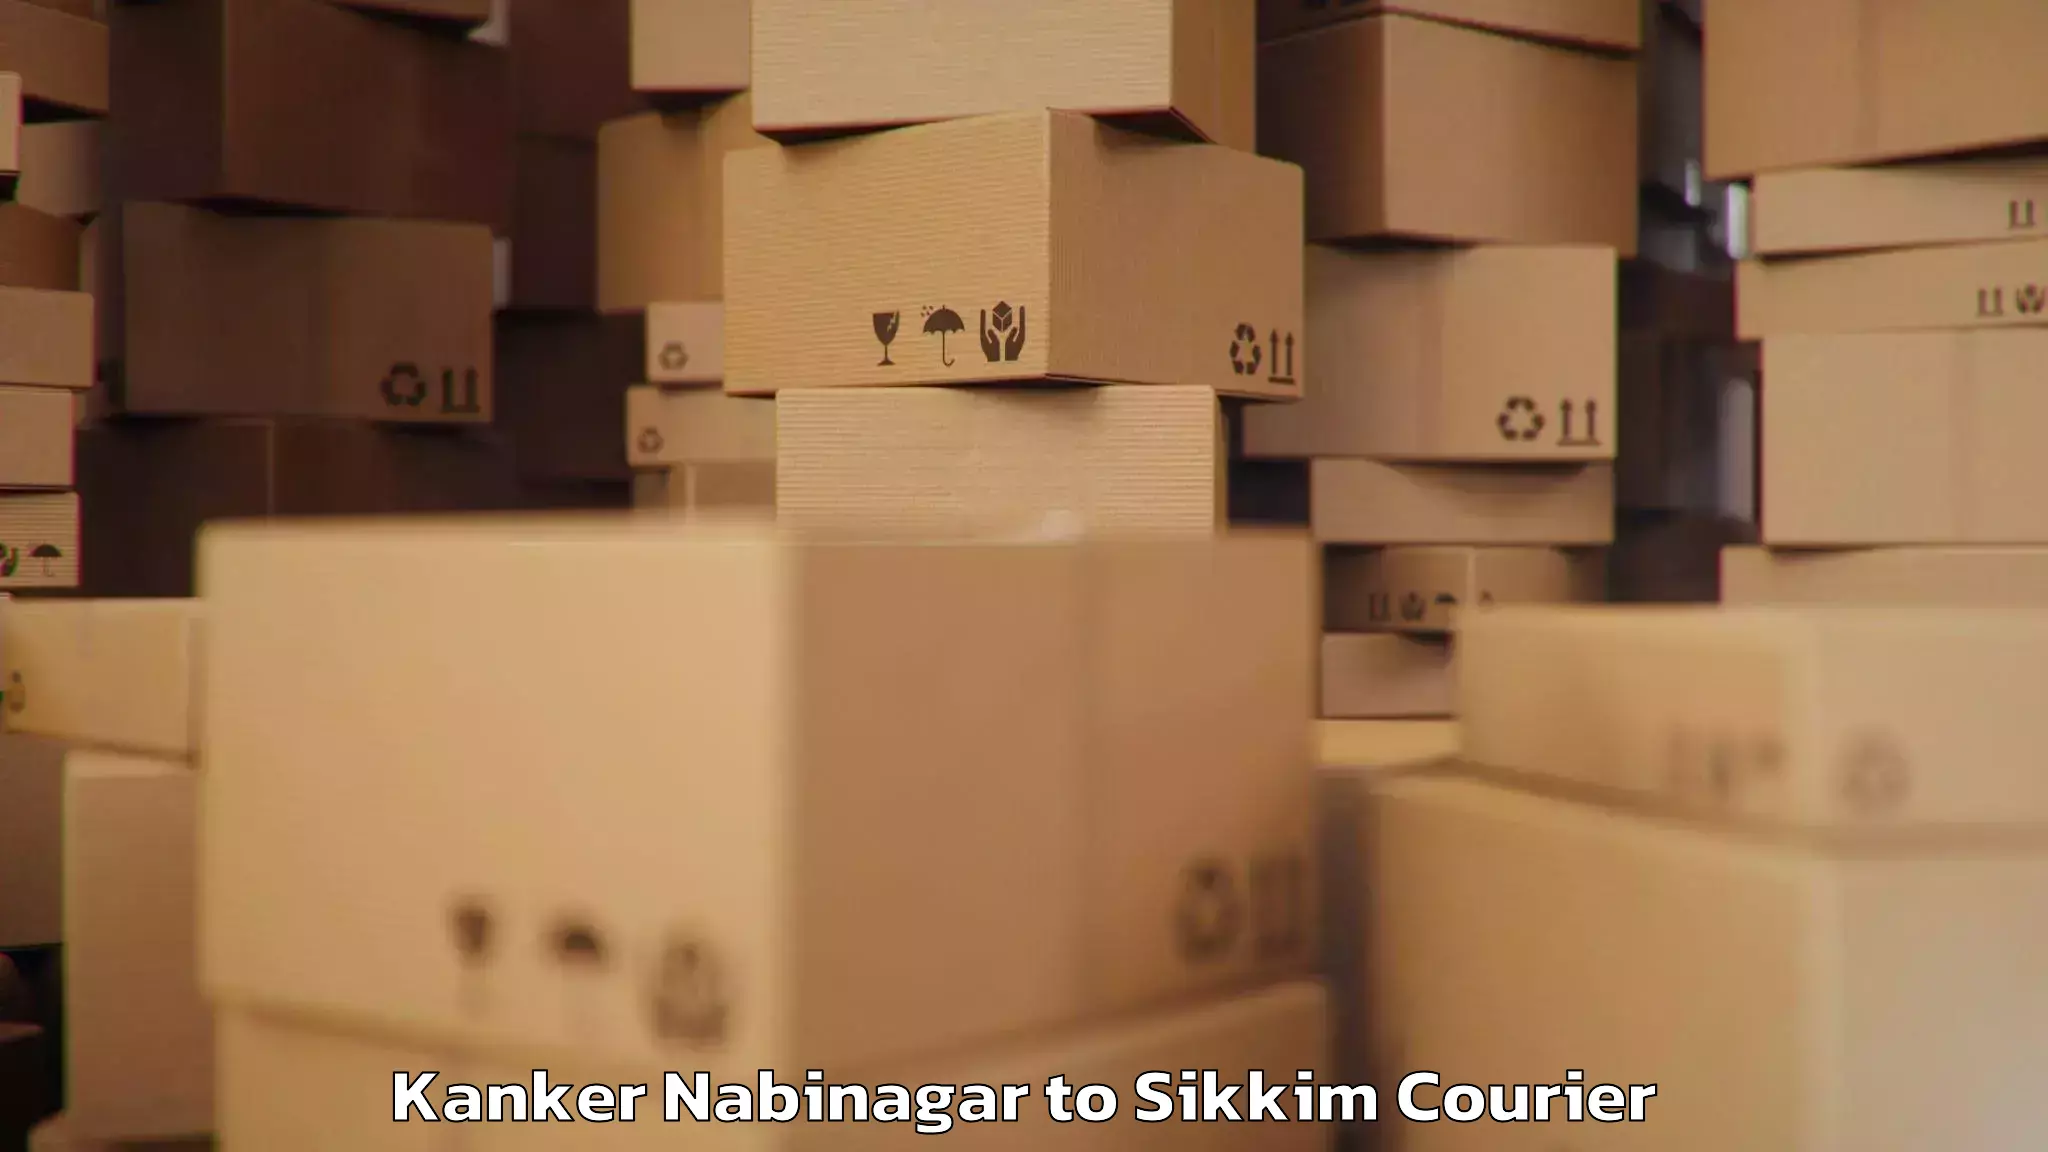 Baggage relocation service Kanker Nabinagar to South Sikkim